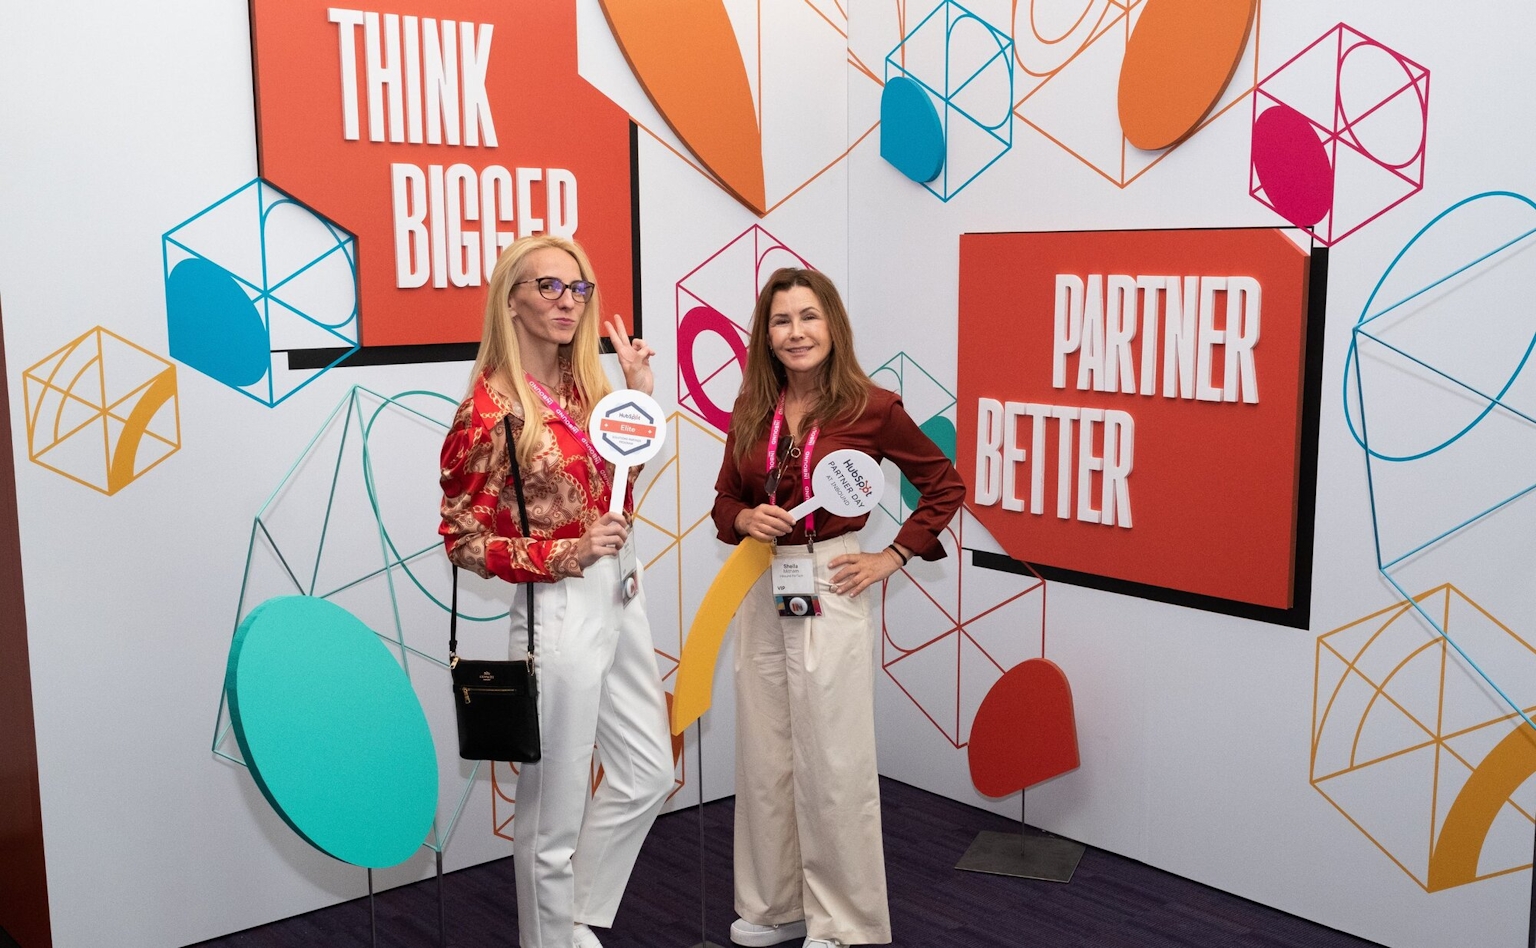 Two people holding signs standing against a backdrop that says "Think Bigger" and "Partner Better".